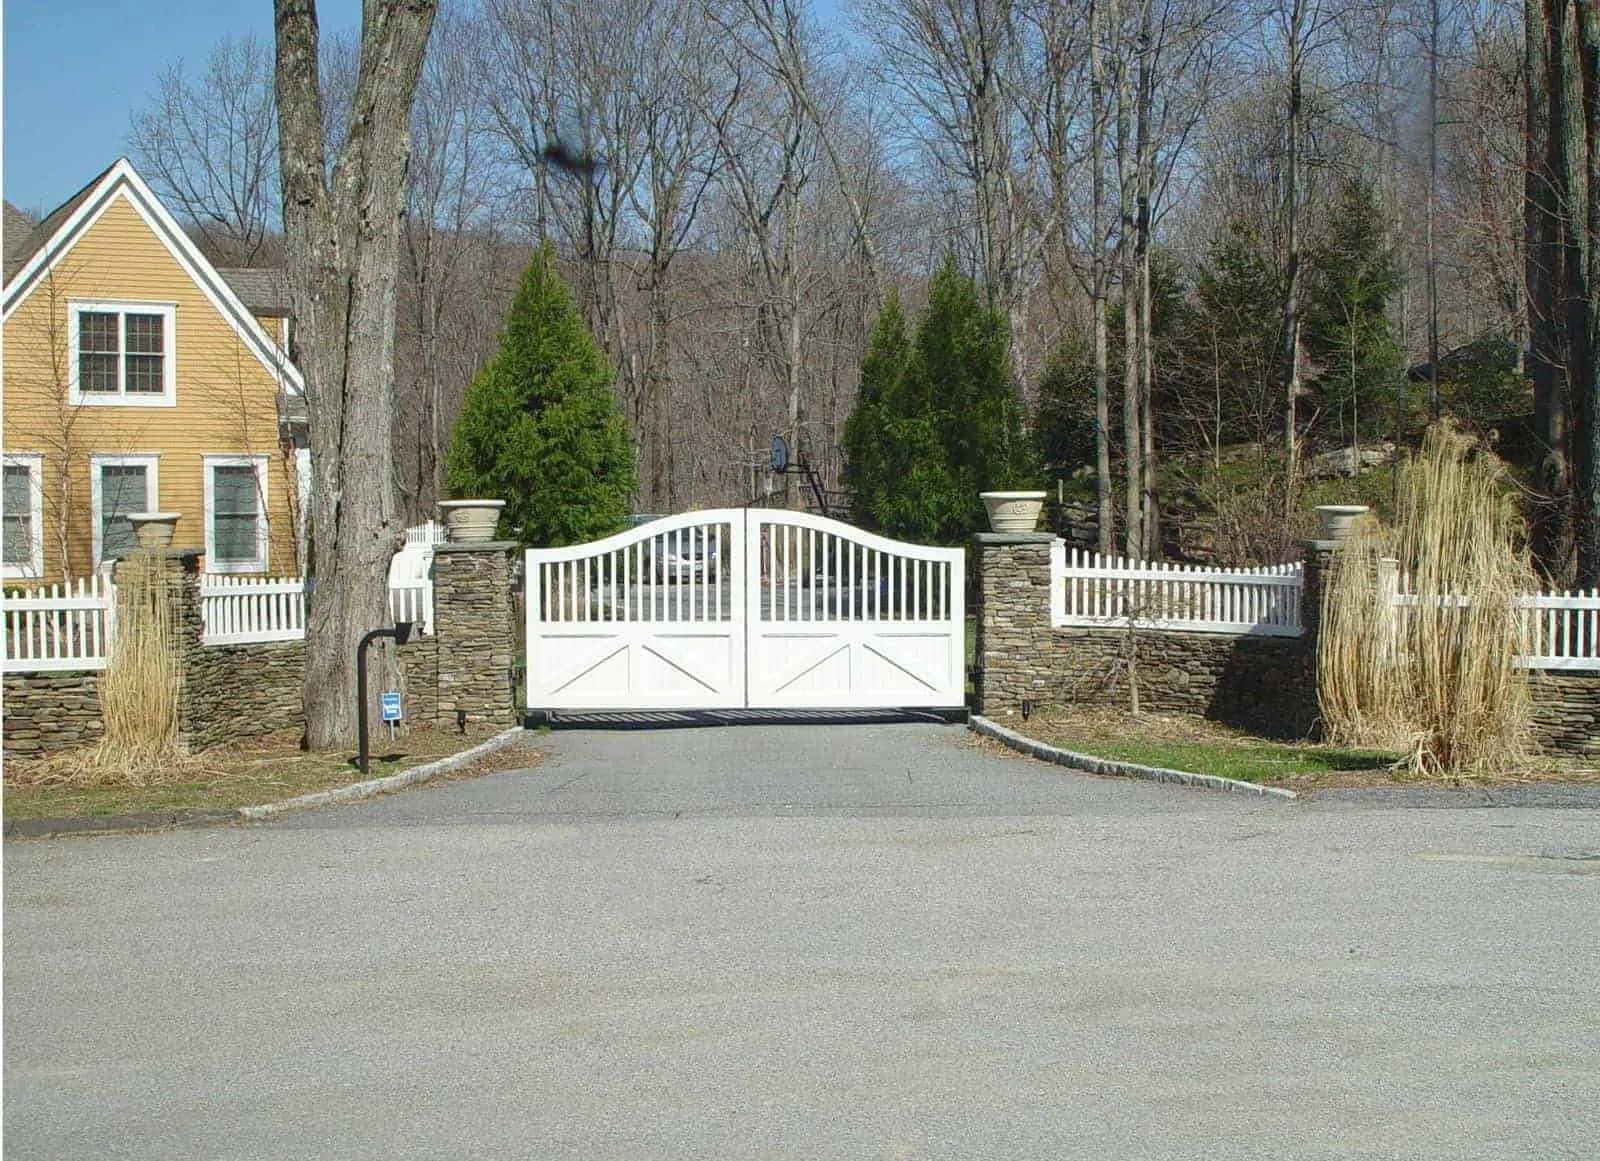 latest steel and iron main gate design for a country home with white fences